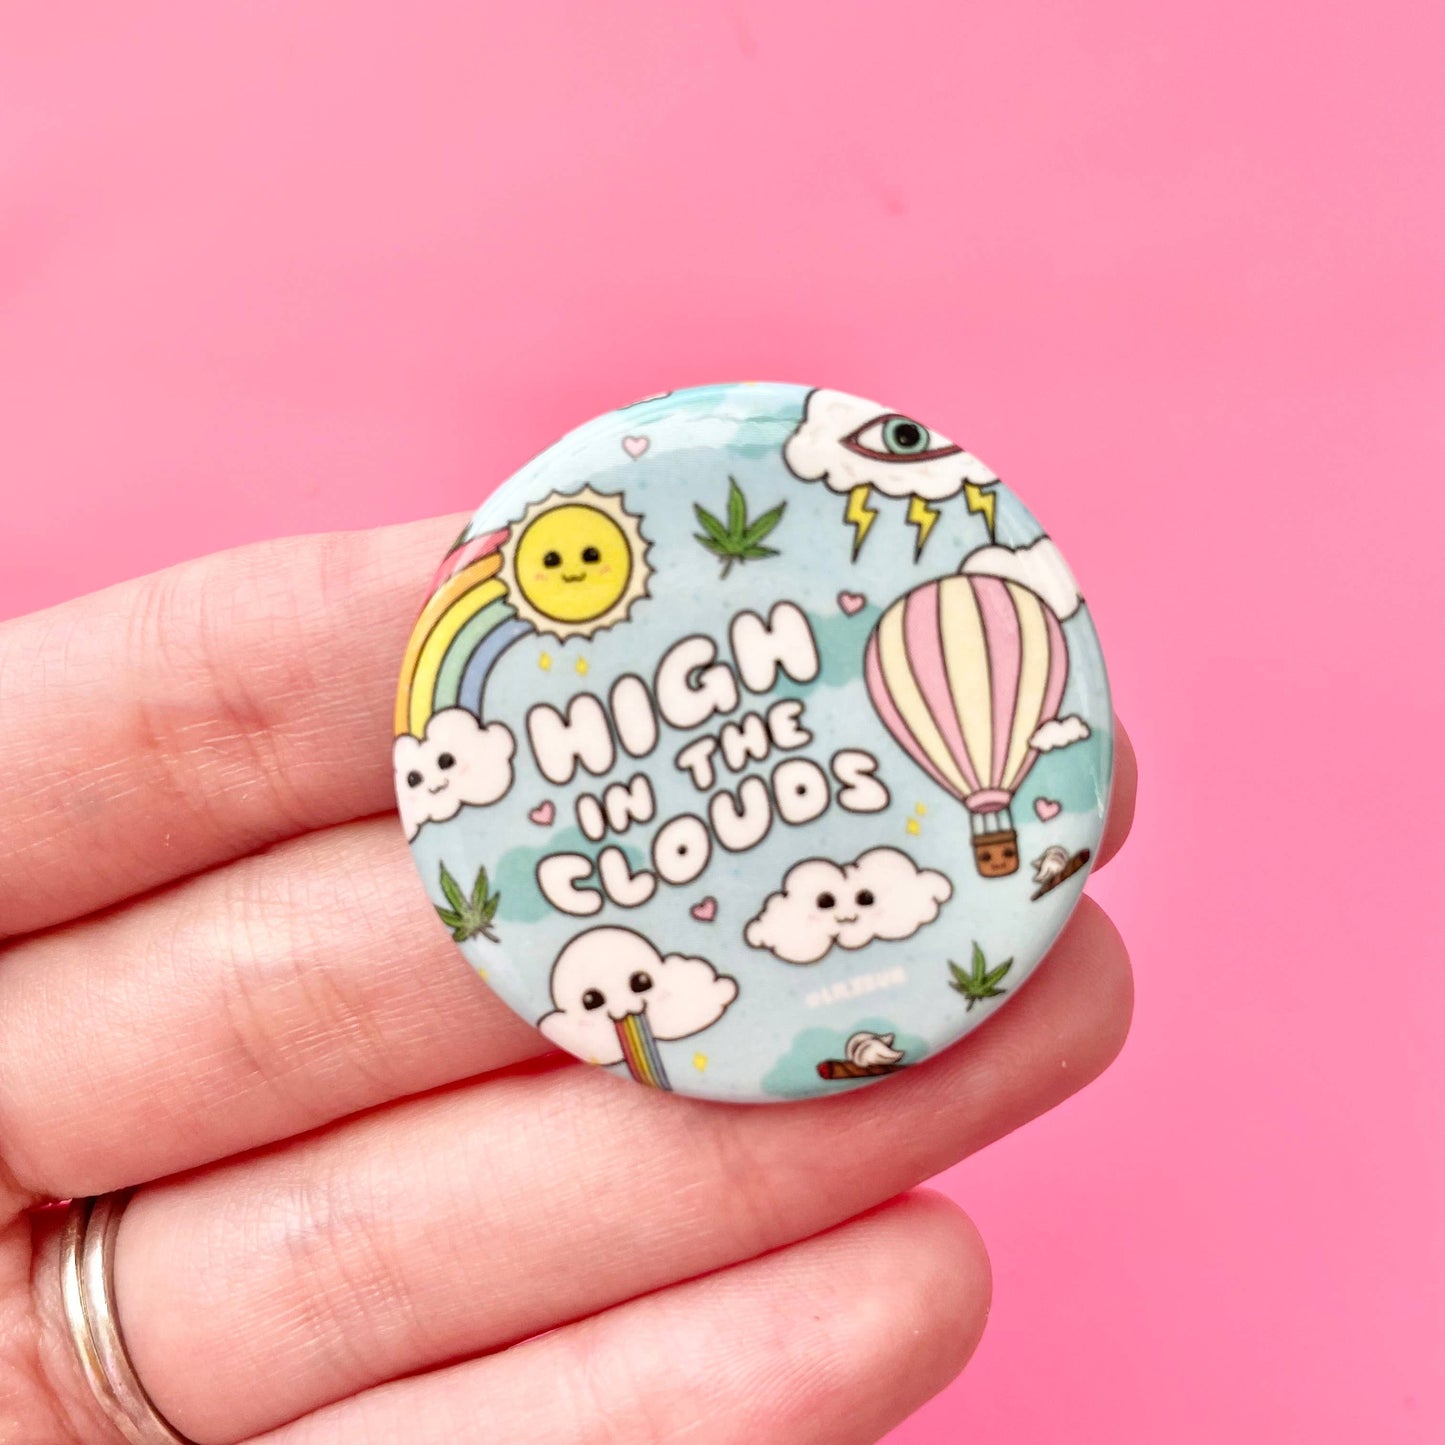 lilxbun - High in the Clouds Button 1.5" yoga smokes yoga studio, delivery, delivery near me, yoga smokes smoke shop, find smoke shop, head shop near me, yoga studio, headshop, head shop, local smoke shop, psl, psl smoke shop, smoke shop, smokeshop, yoga, yoga studio, dispensary, local dispensary, smokeshop near me, port saint lucie, florida, port st lucie, lounge, life, highlife, love, stoned, highsociety. Yoga Smokes High in the Clouds Button